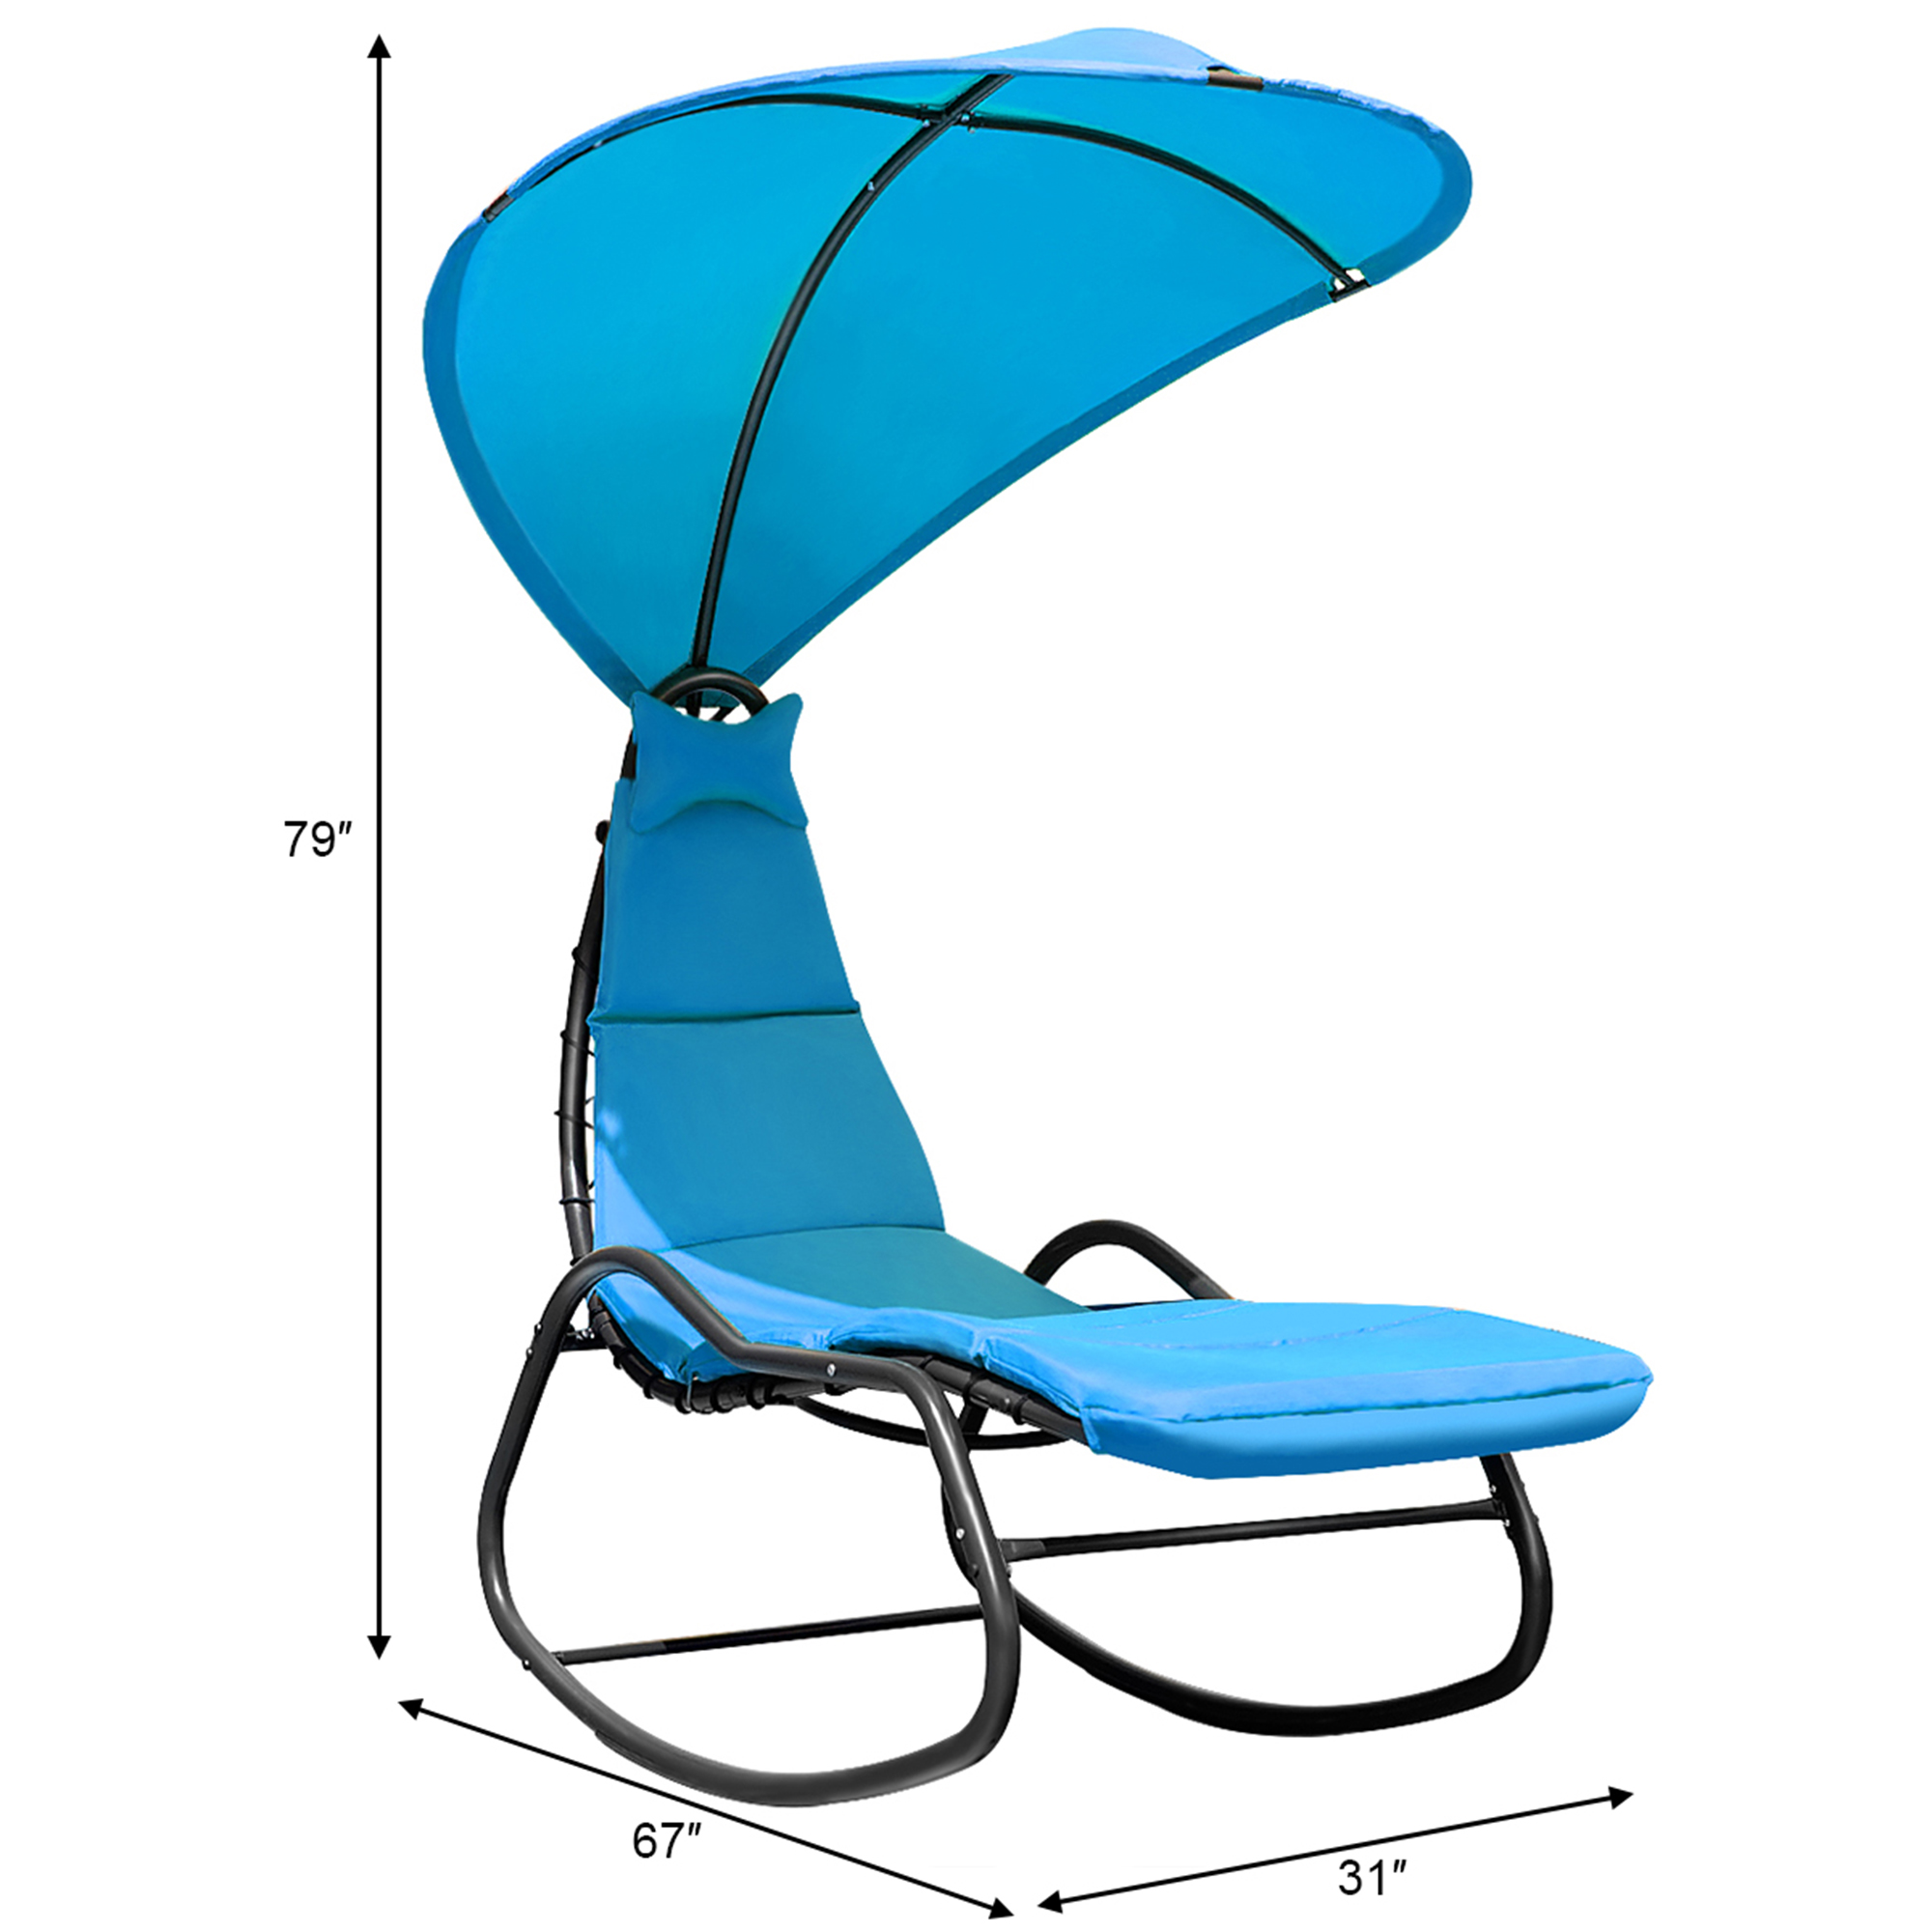 Gymax Patio Lounge Chair Chaise Garden w/ Steel Frame Cushion Canopy Turquoise - image 3 of 9